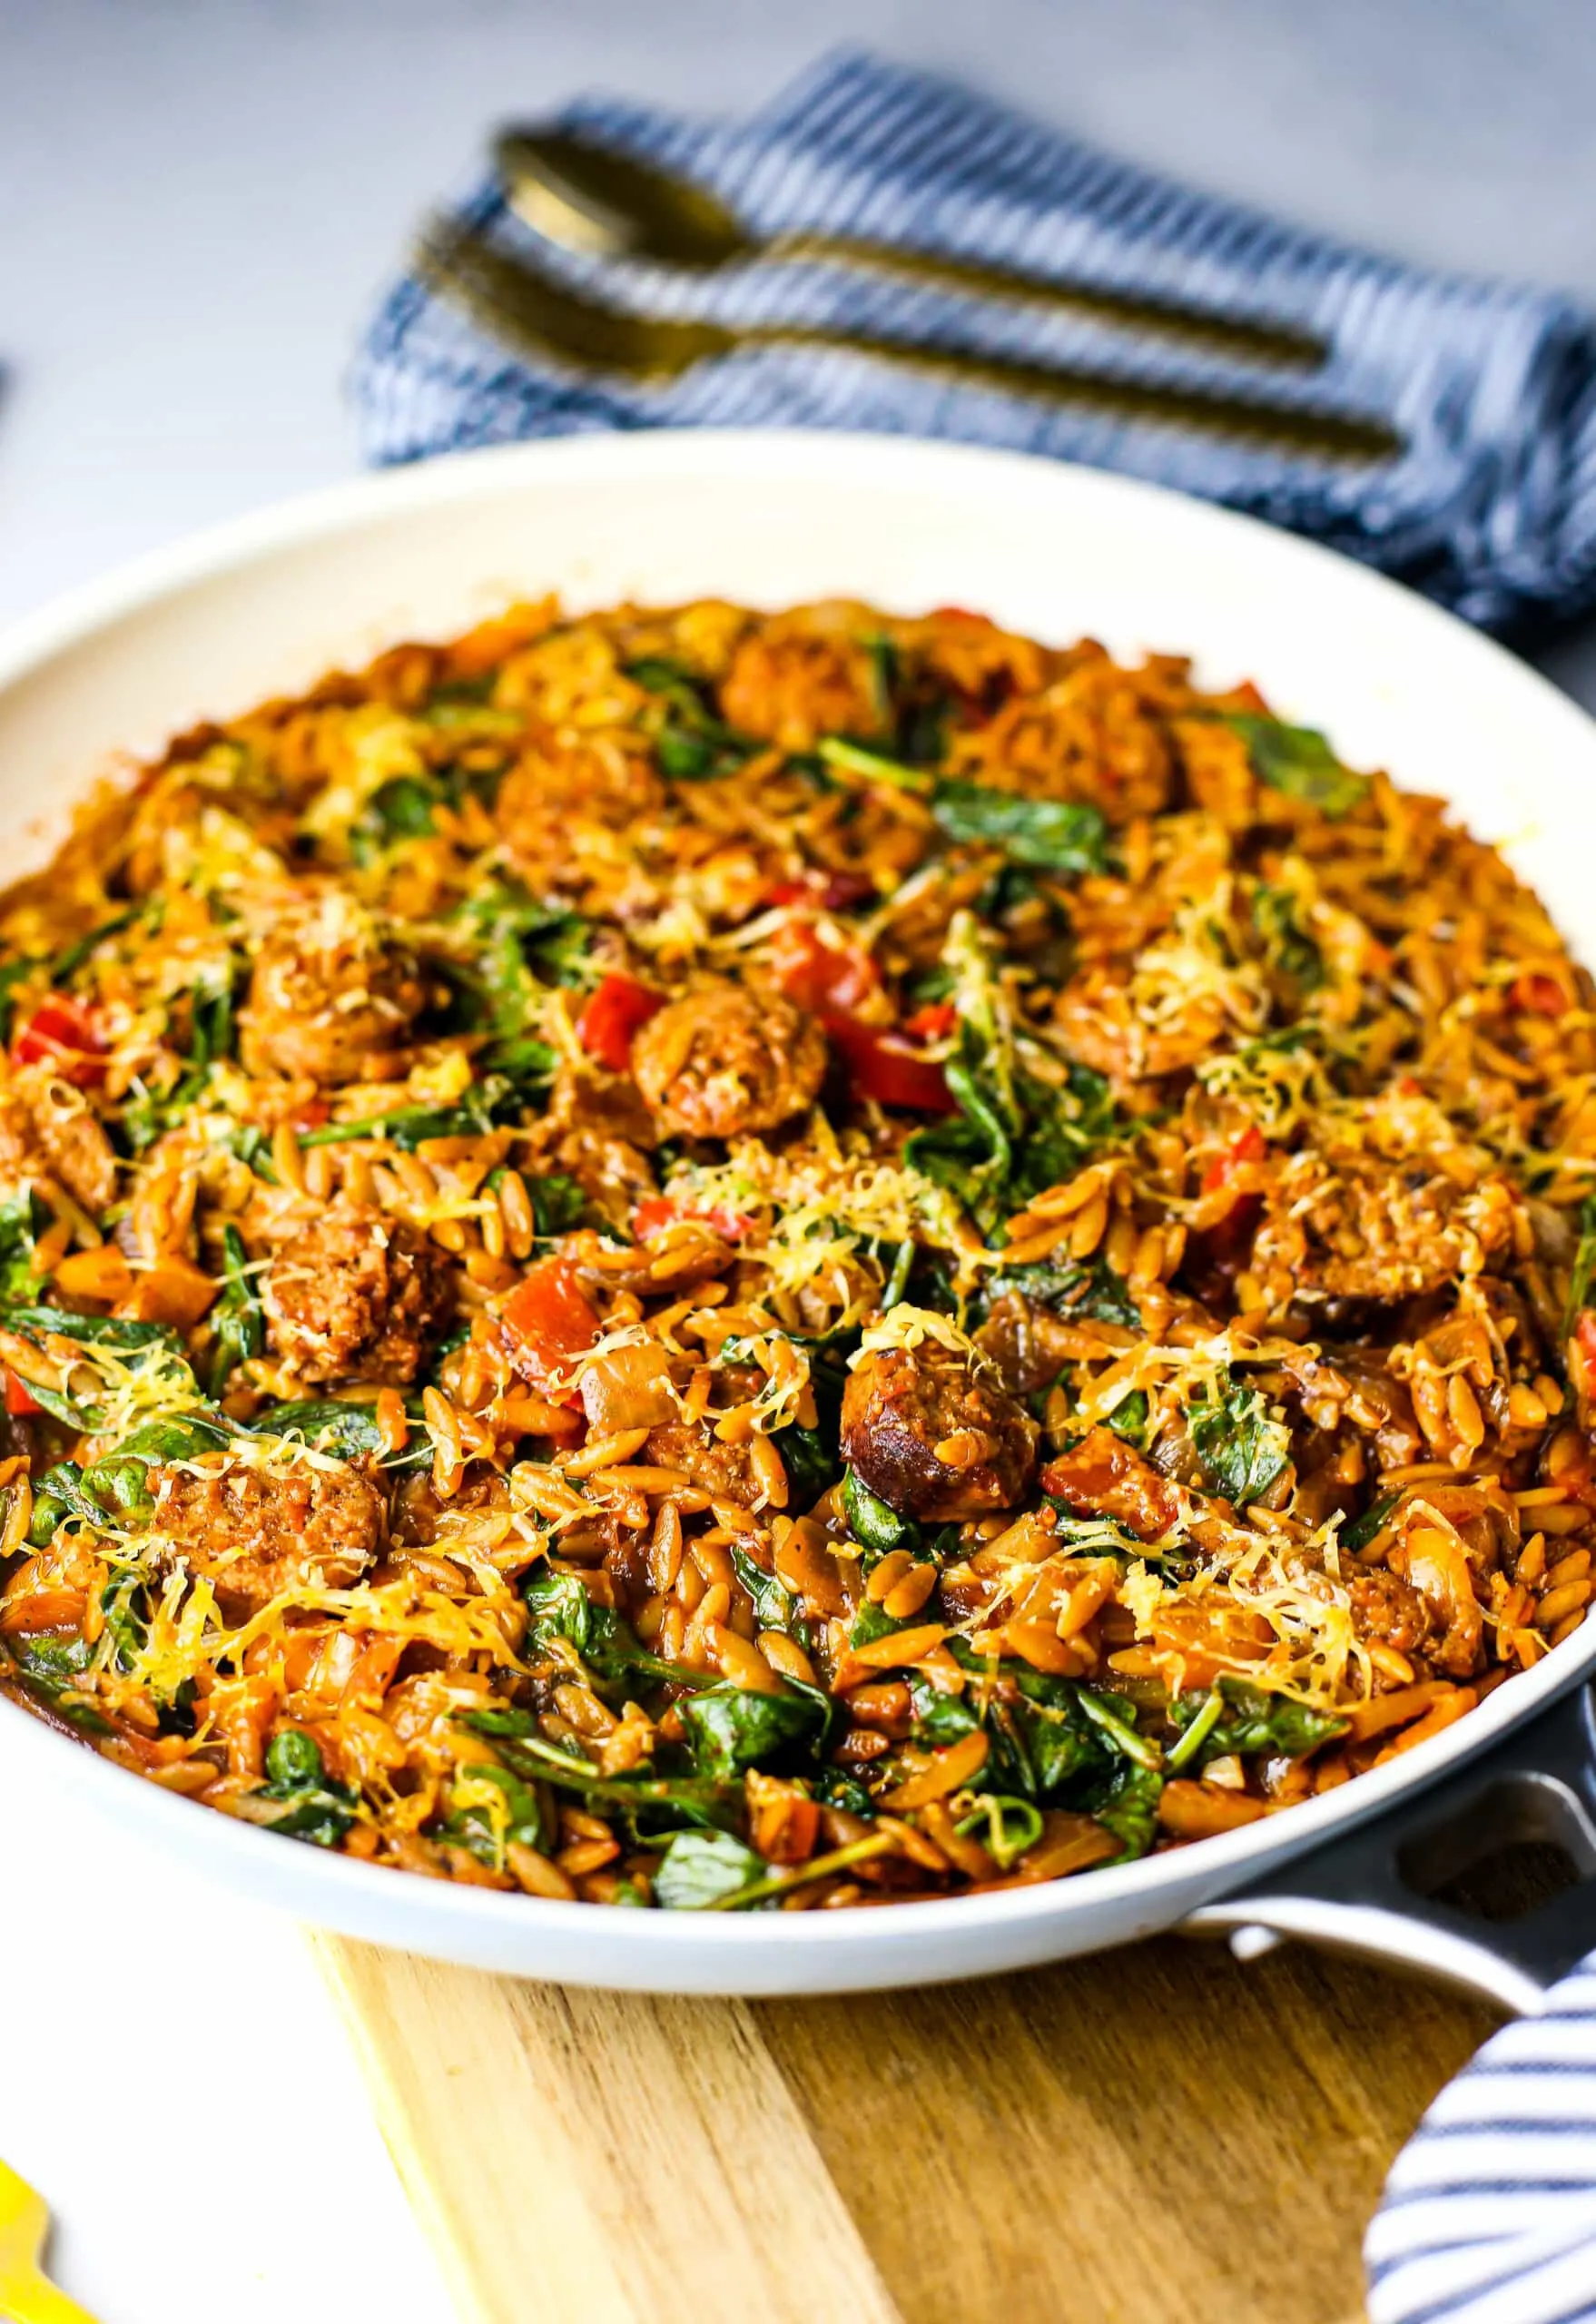 A top-angled view of a white frying pan full of orzo pasta with Italian sausage, onions, and peppers in a marinara sauce.